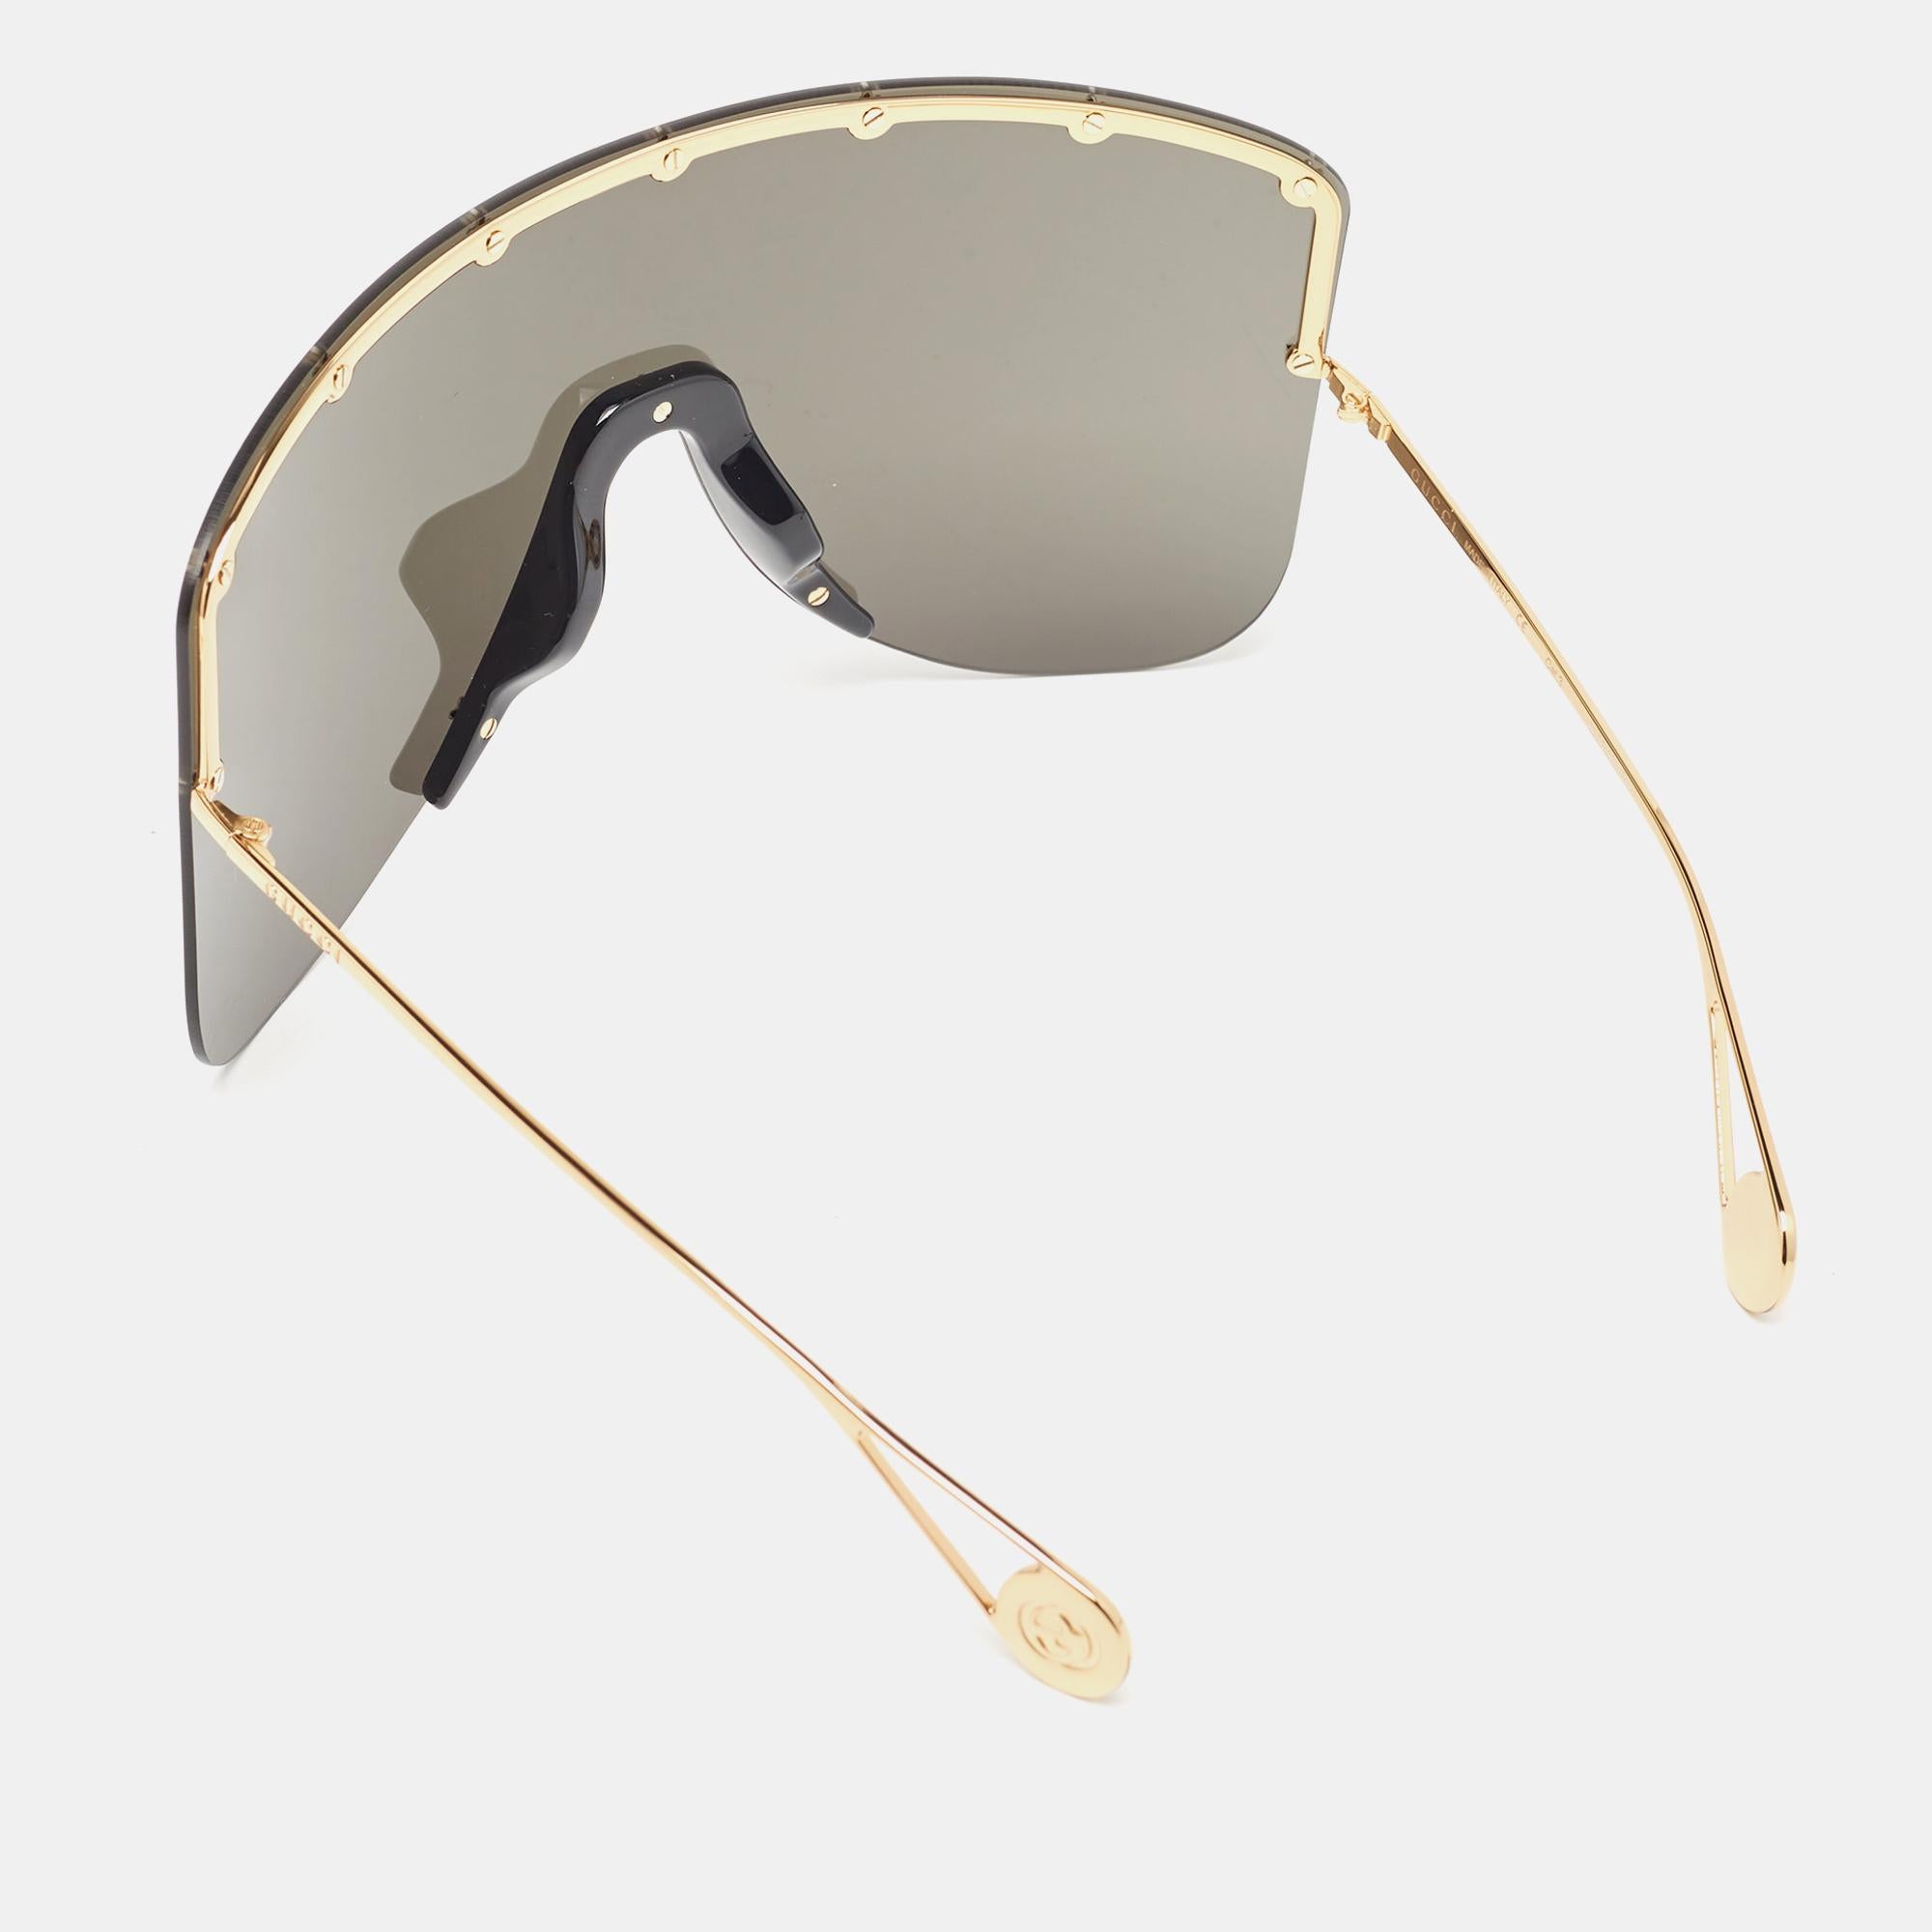 A statement pair of sunglasses from Gucci will surely make a prized buy. Featuring a trendy frame and lenses meant to protect your eyes, the sunglasses are ideal for all-day wear.

Includes: Original Case, Original Dust Cloth, Info Booklet

